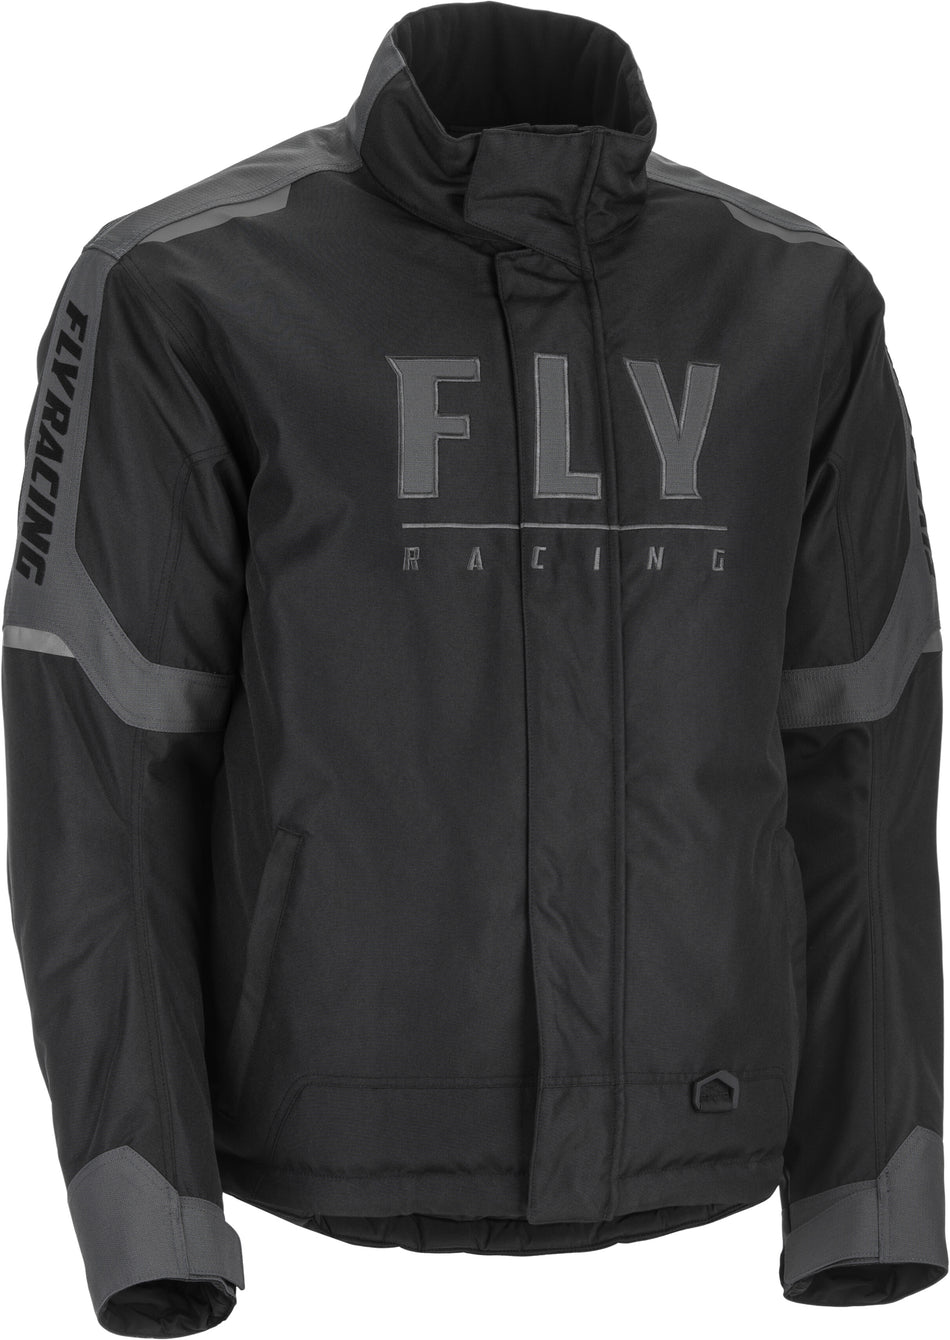 FLY RACING Outpost Jacket Black/Grey 4x 470-41404X